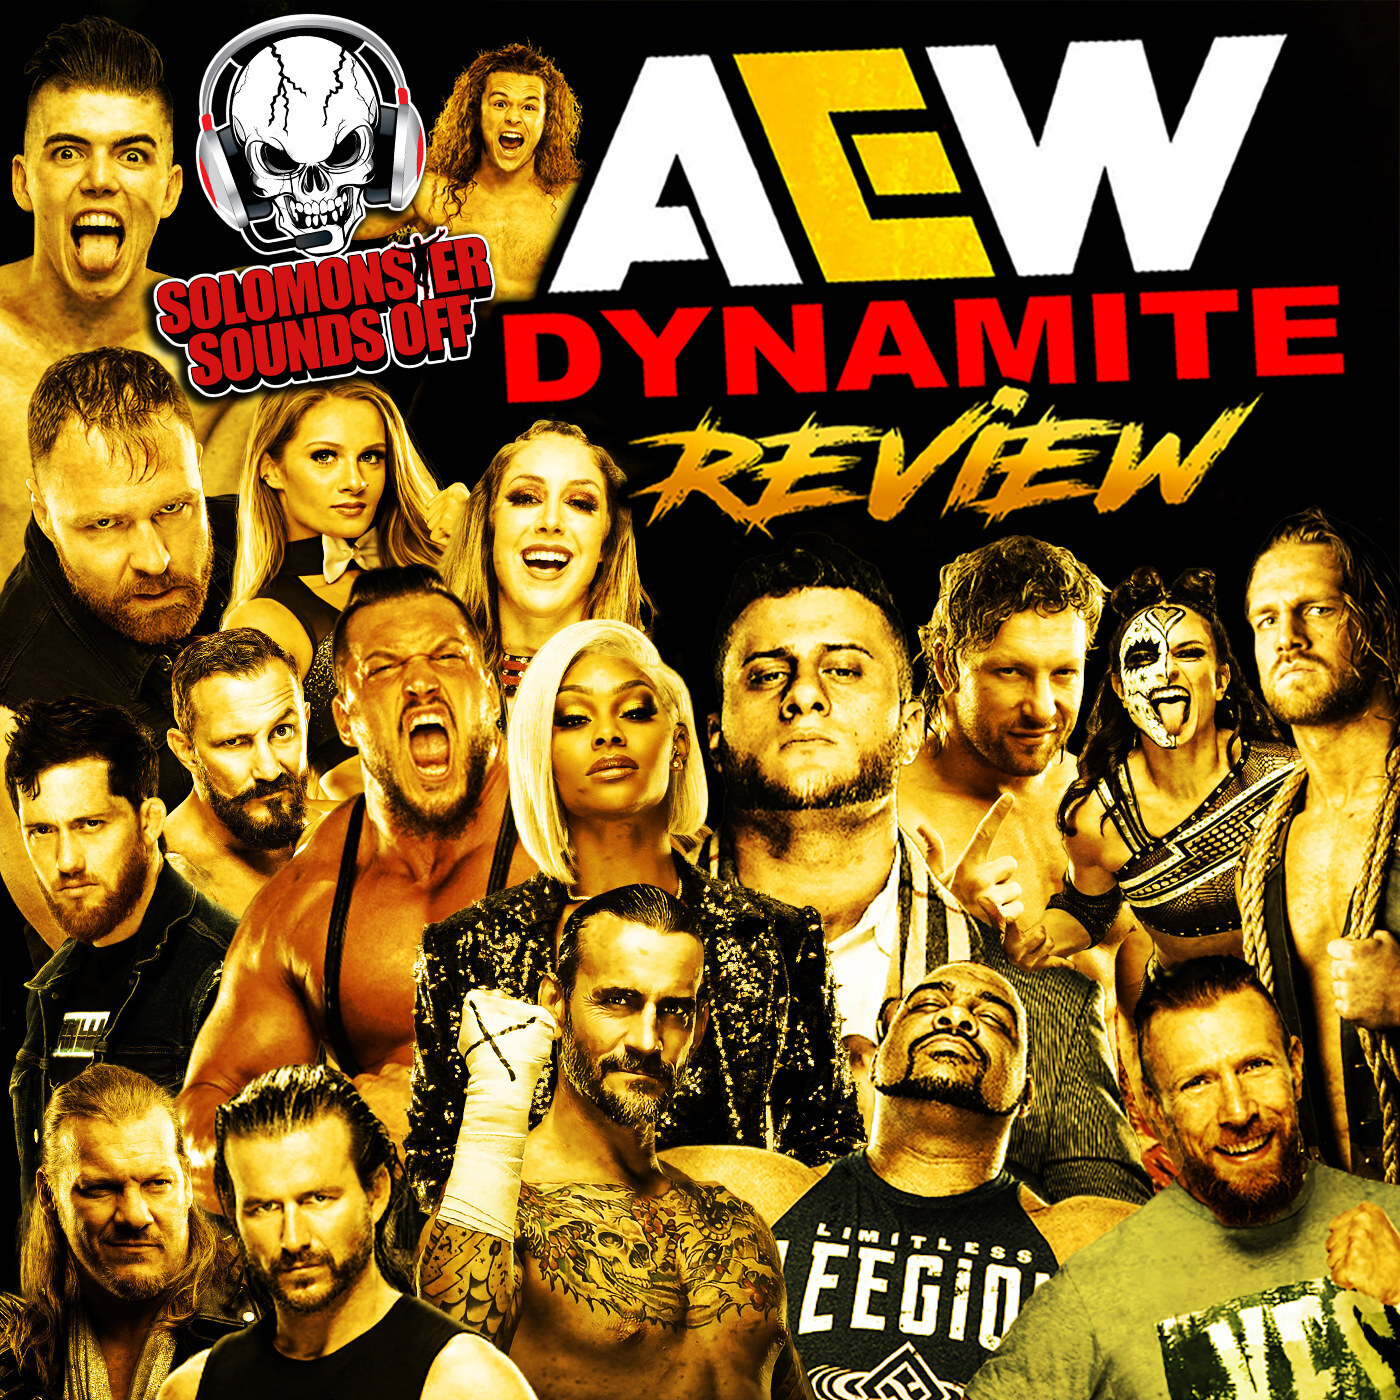 AEW Dynamite 4/20/22 Review - THE FORBIDDEN DOOR BLOWN WIDE OPEN WITH AEW AND NJPW!